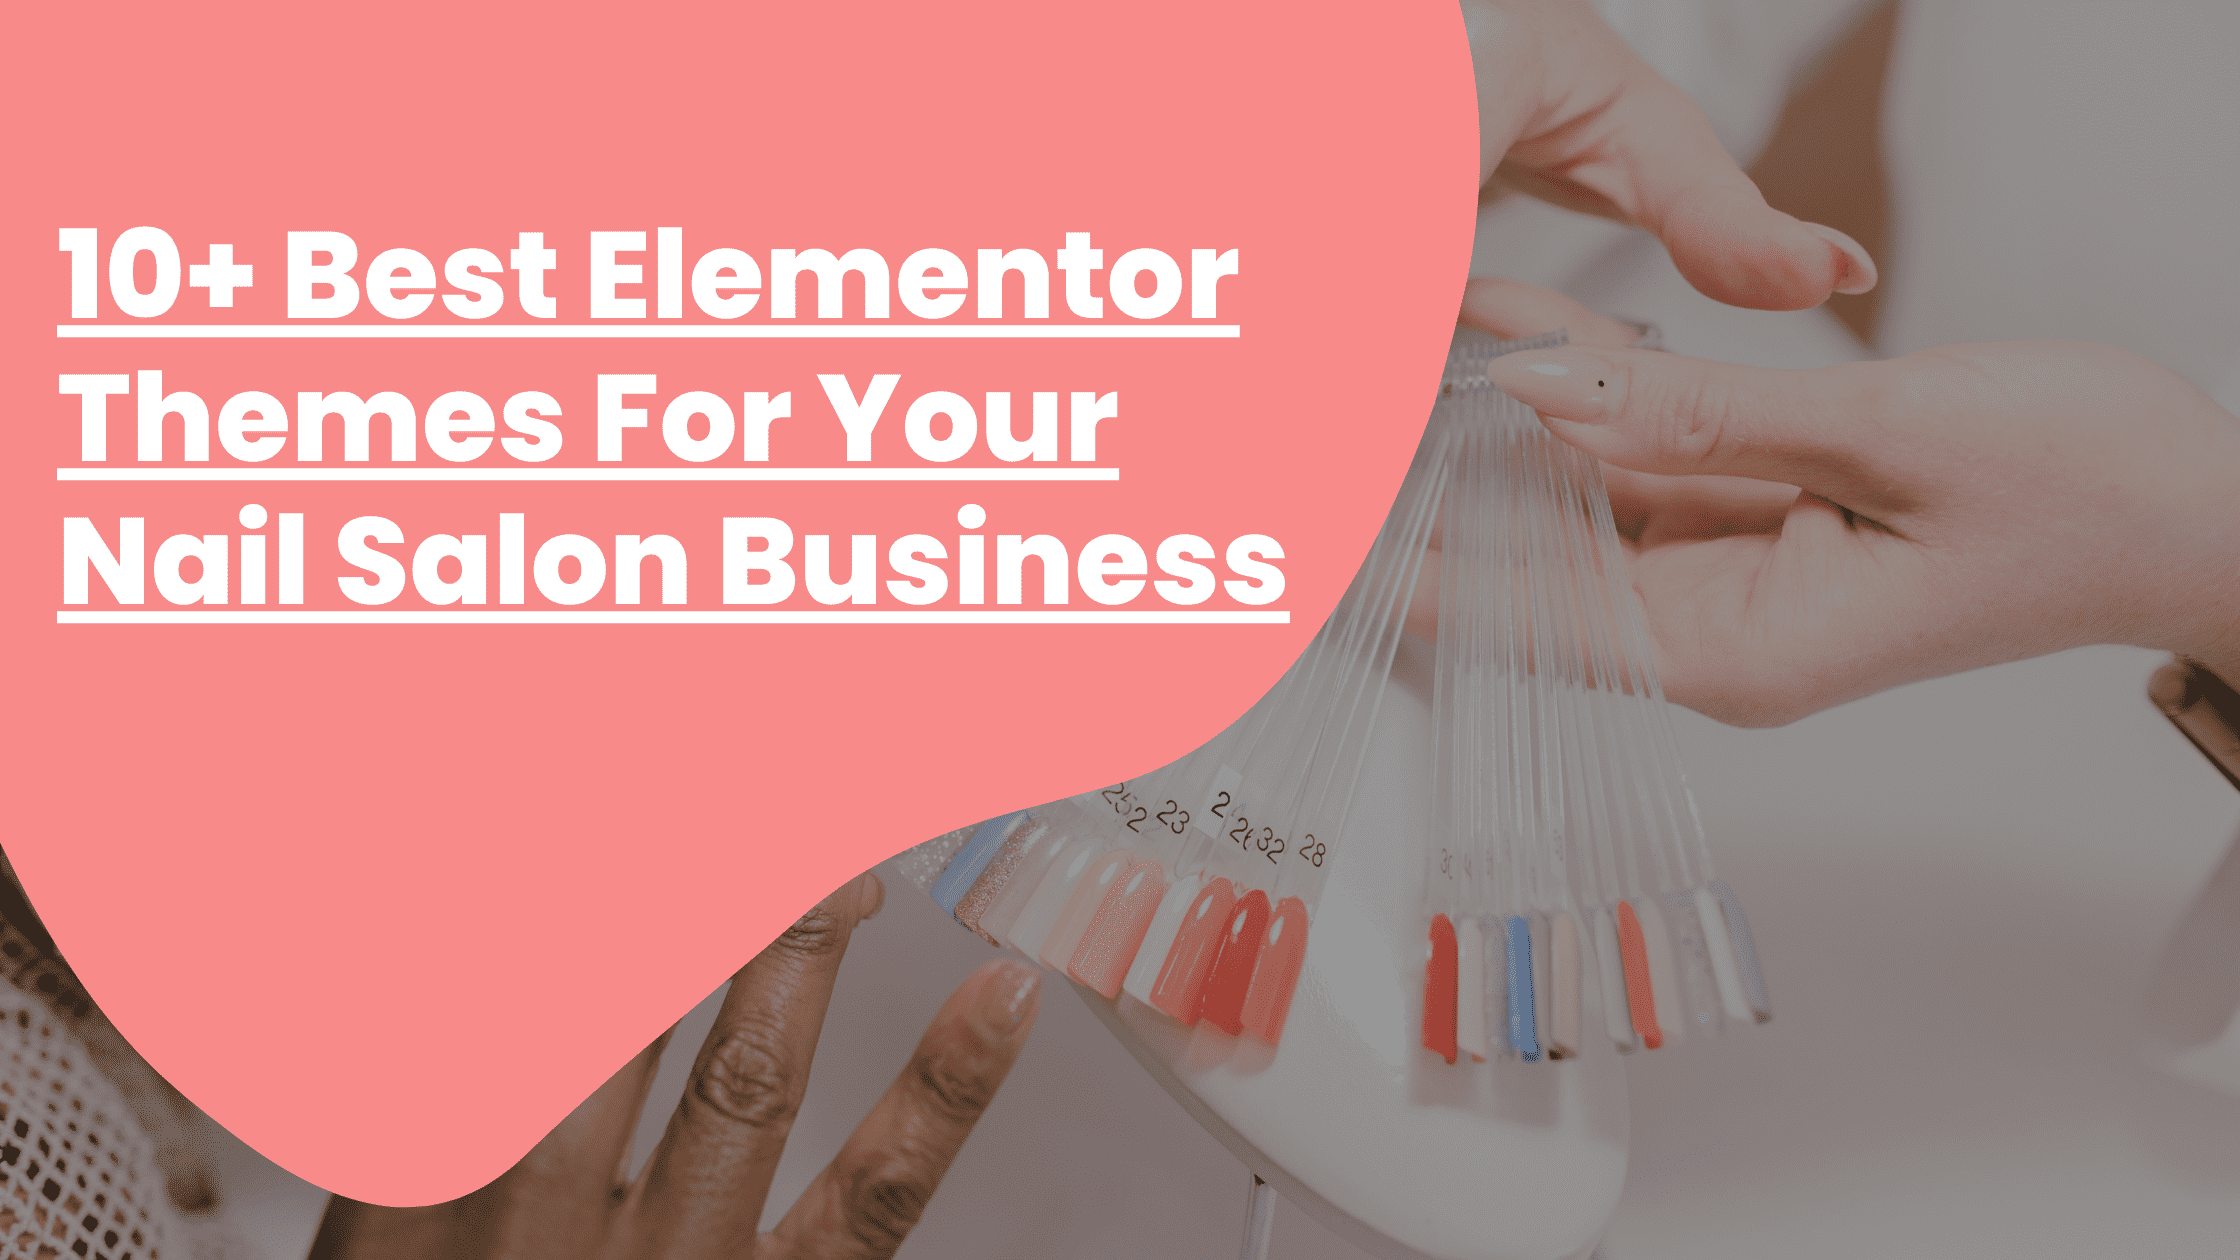 10+ Best Elementor Themes for Your Nail Salon Business